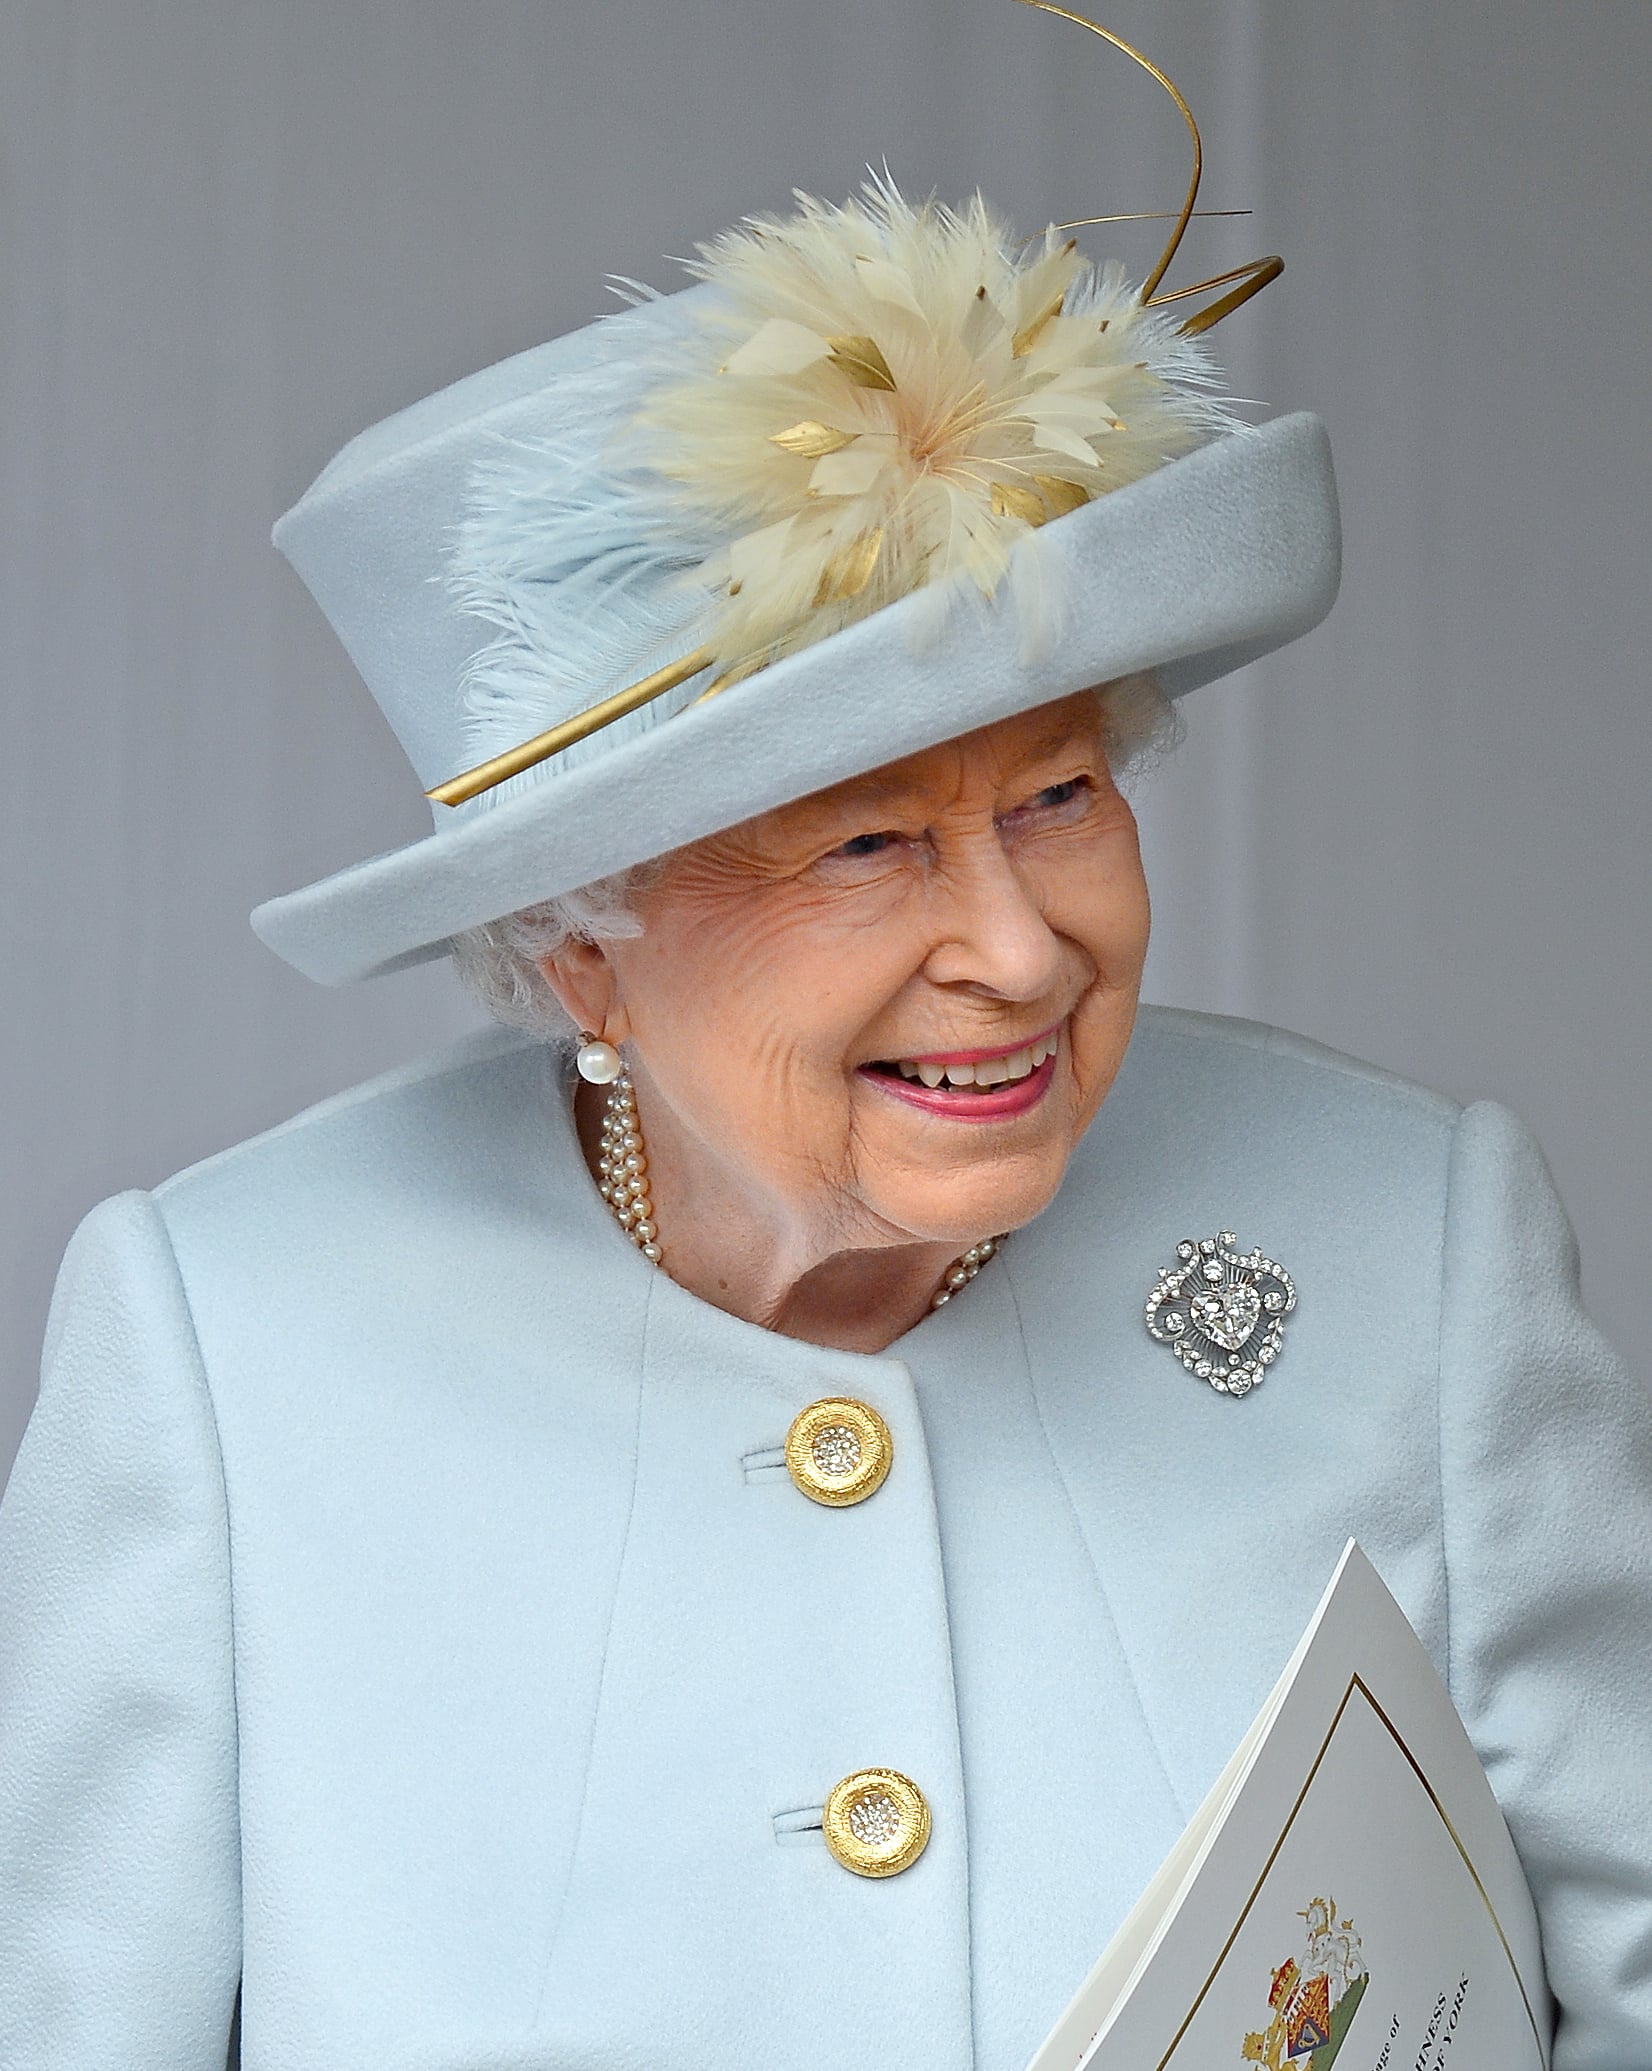 WINDSOR, UNITED KINGDOM - OCTOBER 12: (EMBARGOED FOR PUBLICATION IN UK NEWSPAPERS UNTIL 24 HOURS AFTER CREATE DATE AND TIME) Queen Elizabeth II attends the wedding of Princess Eugenie of York and Jack Brooksbank at St George's Chapel on October 12, 2018 in Windsor, England. (Photo by Pool/Max Mumby/Getty Images)